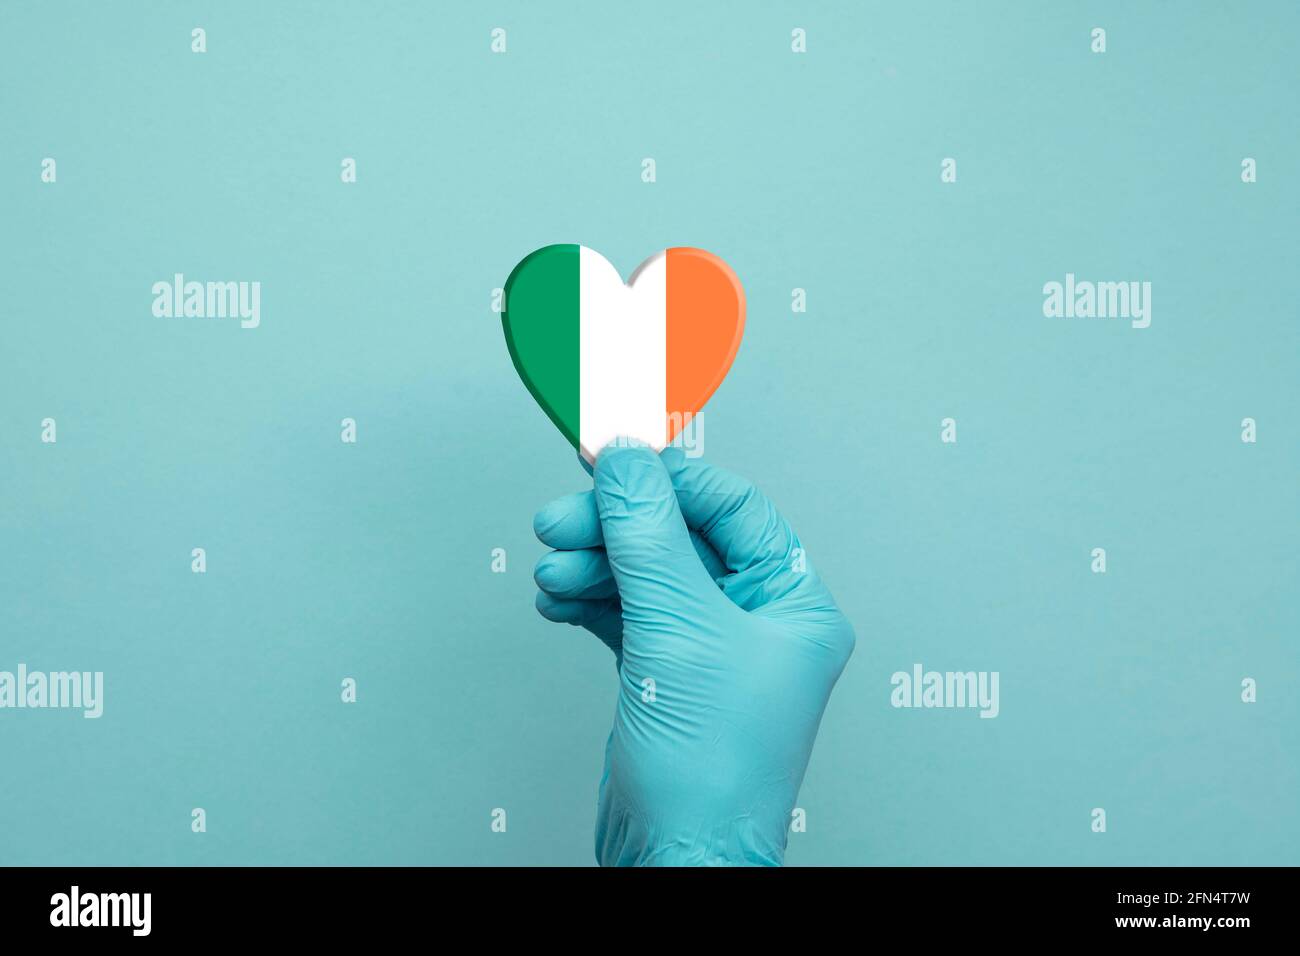 Hands wearing protective surgical gloves holding Ireland flag heart Stock Photo